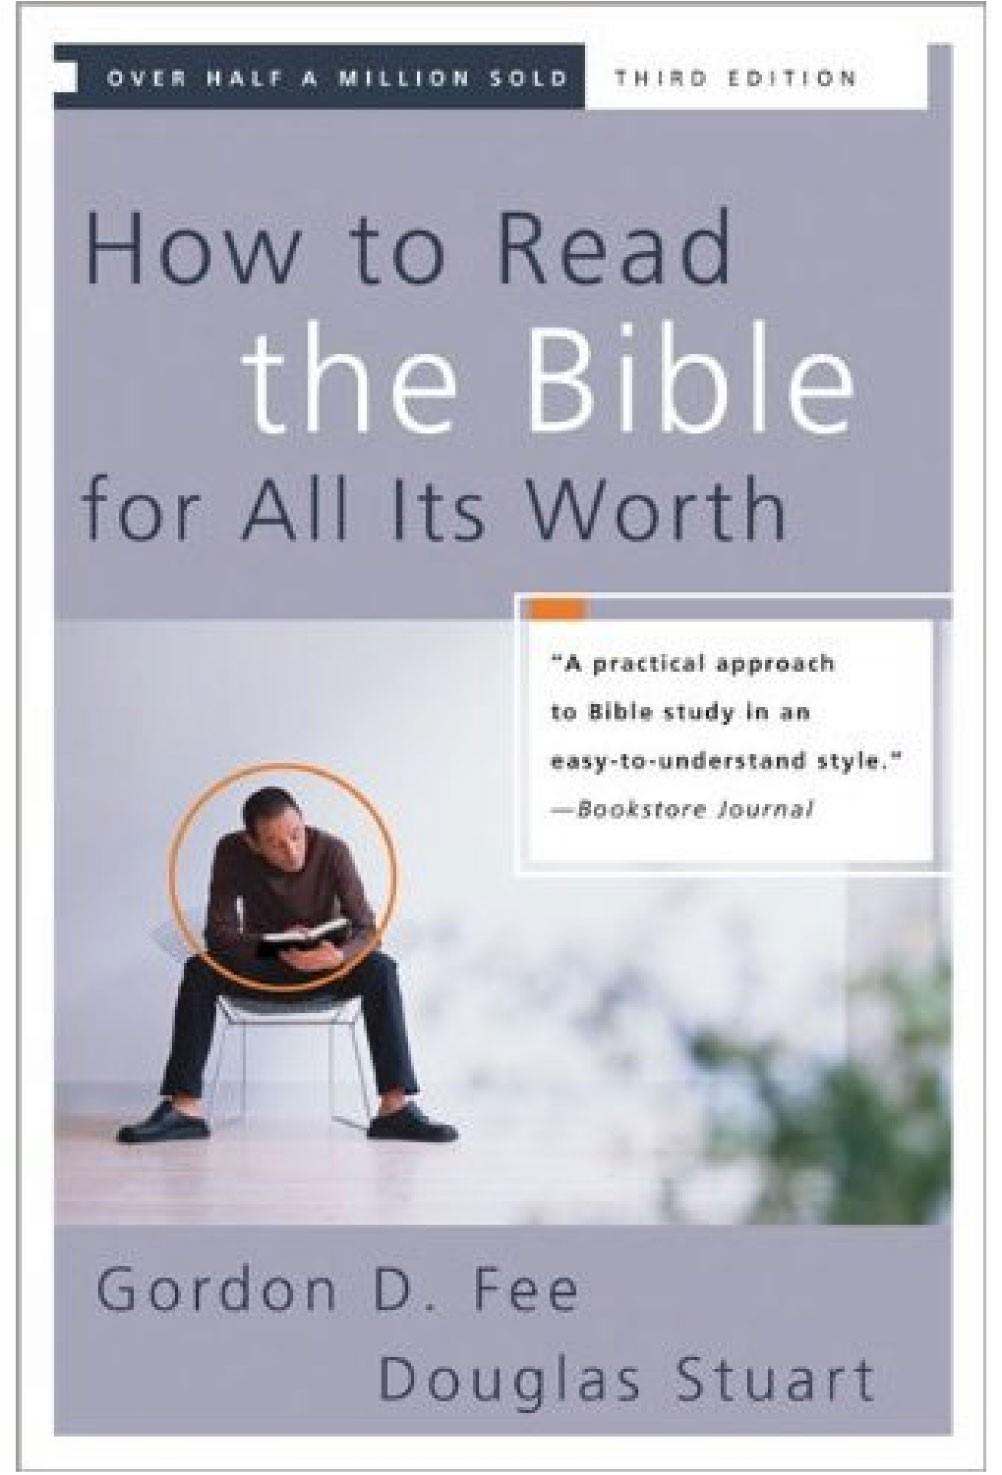 HOW TO READ THE BIBLE Practical Help for Reading Scripture Back to the basics Tools for Reading Let the Bible come alive For more info call Fr. Karl or Fr. Joe @ 861-6020 Sundays 9:30-10:15 a.m. starting Sept.